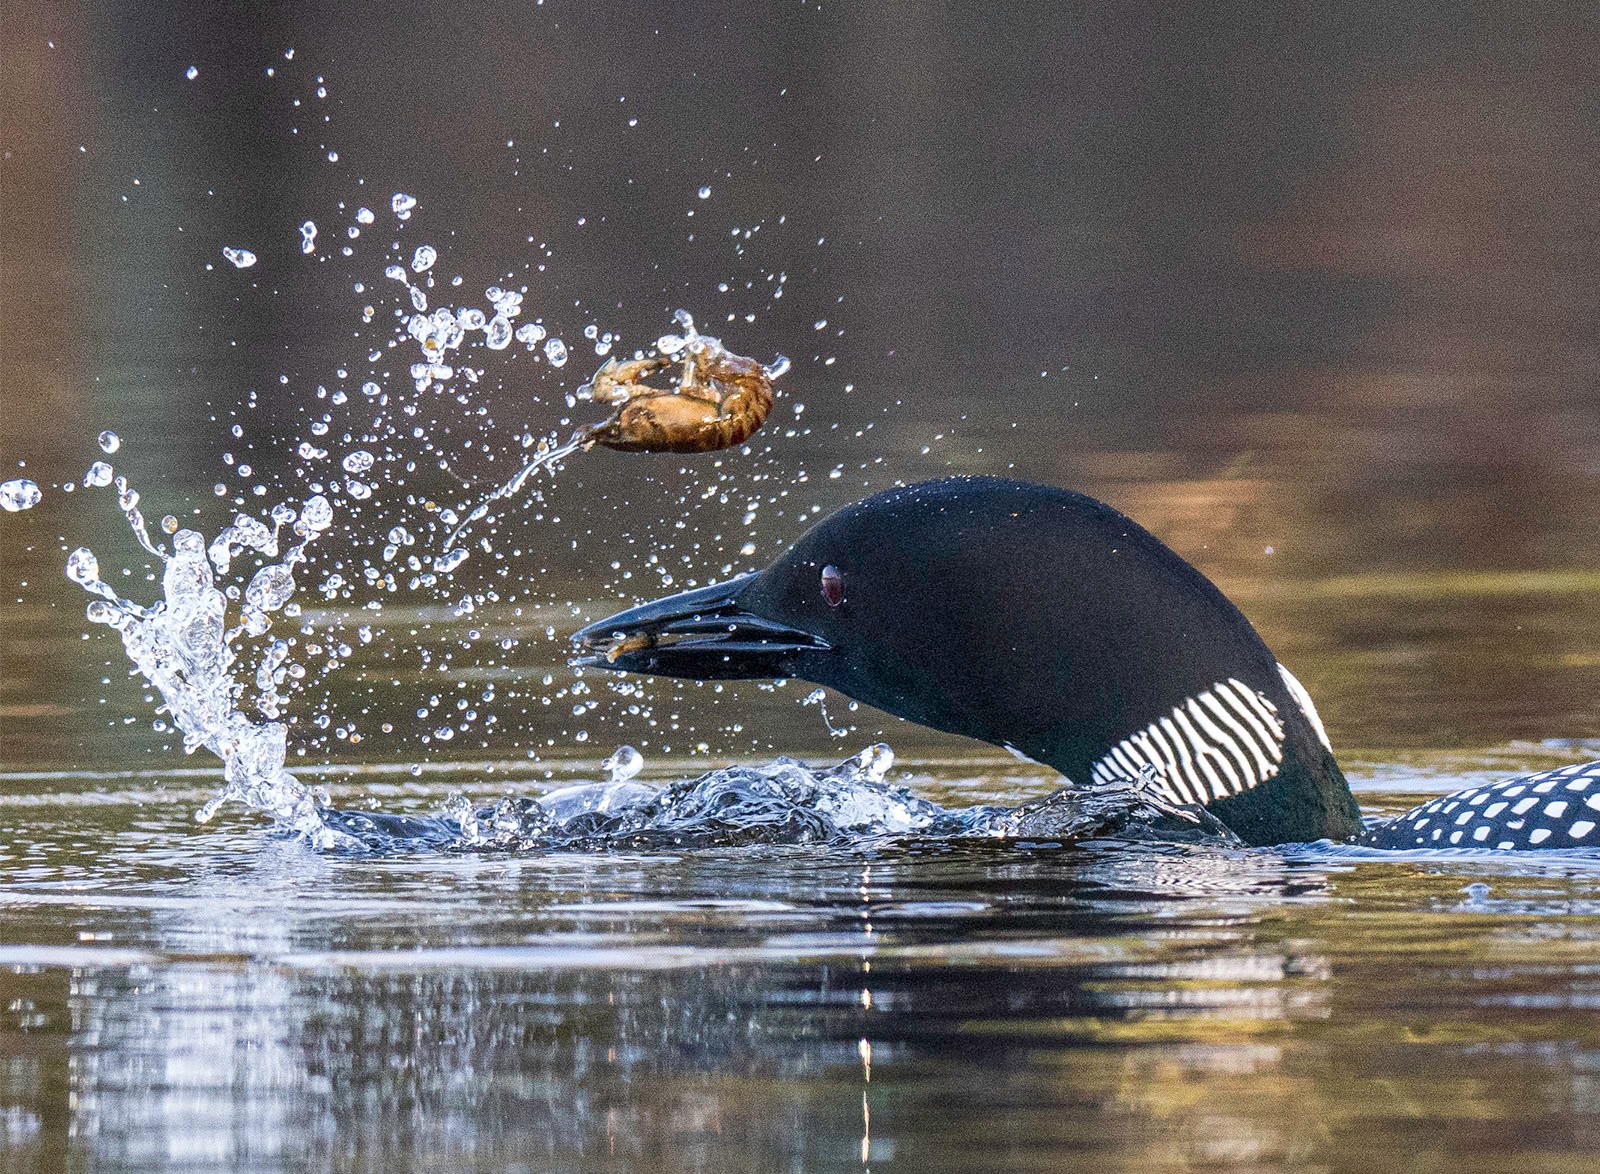 A loon with striking black and white feathers catches a fish, causing a dynamic splash in the tranquil water.